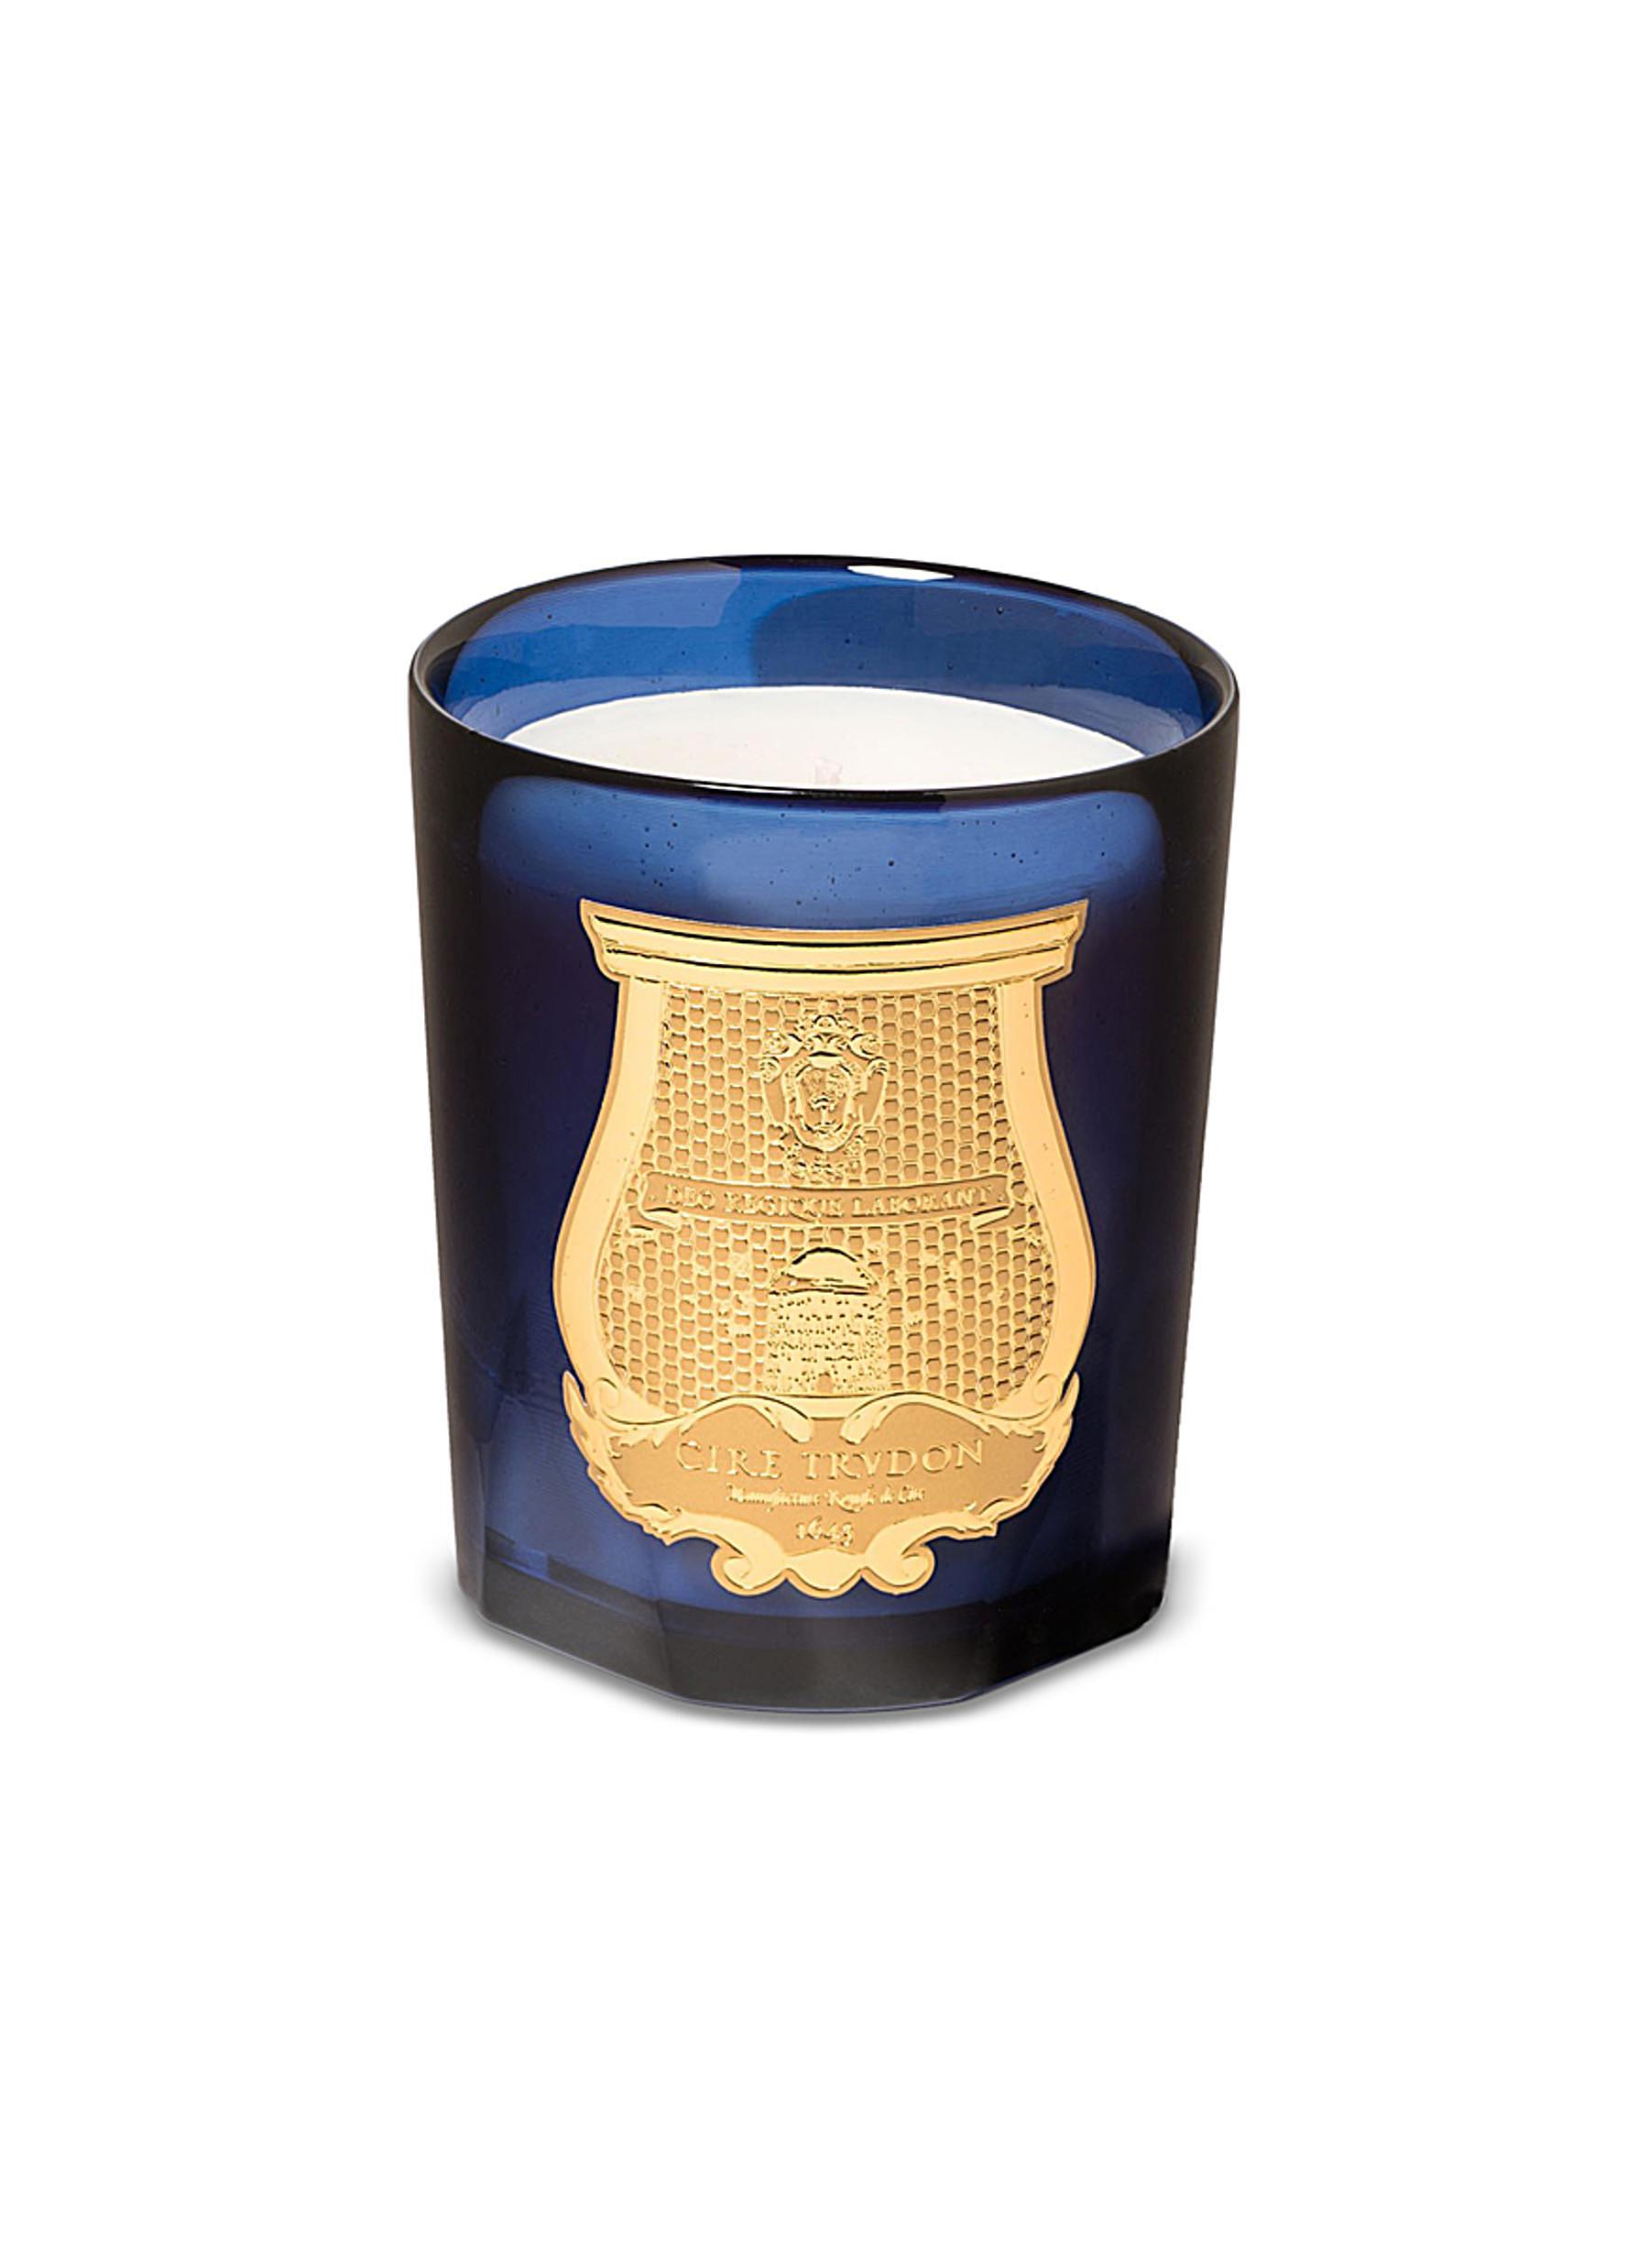 Estérel scented candle 270g - Brightness of Mimosa